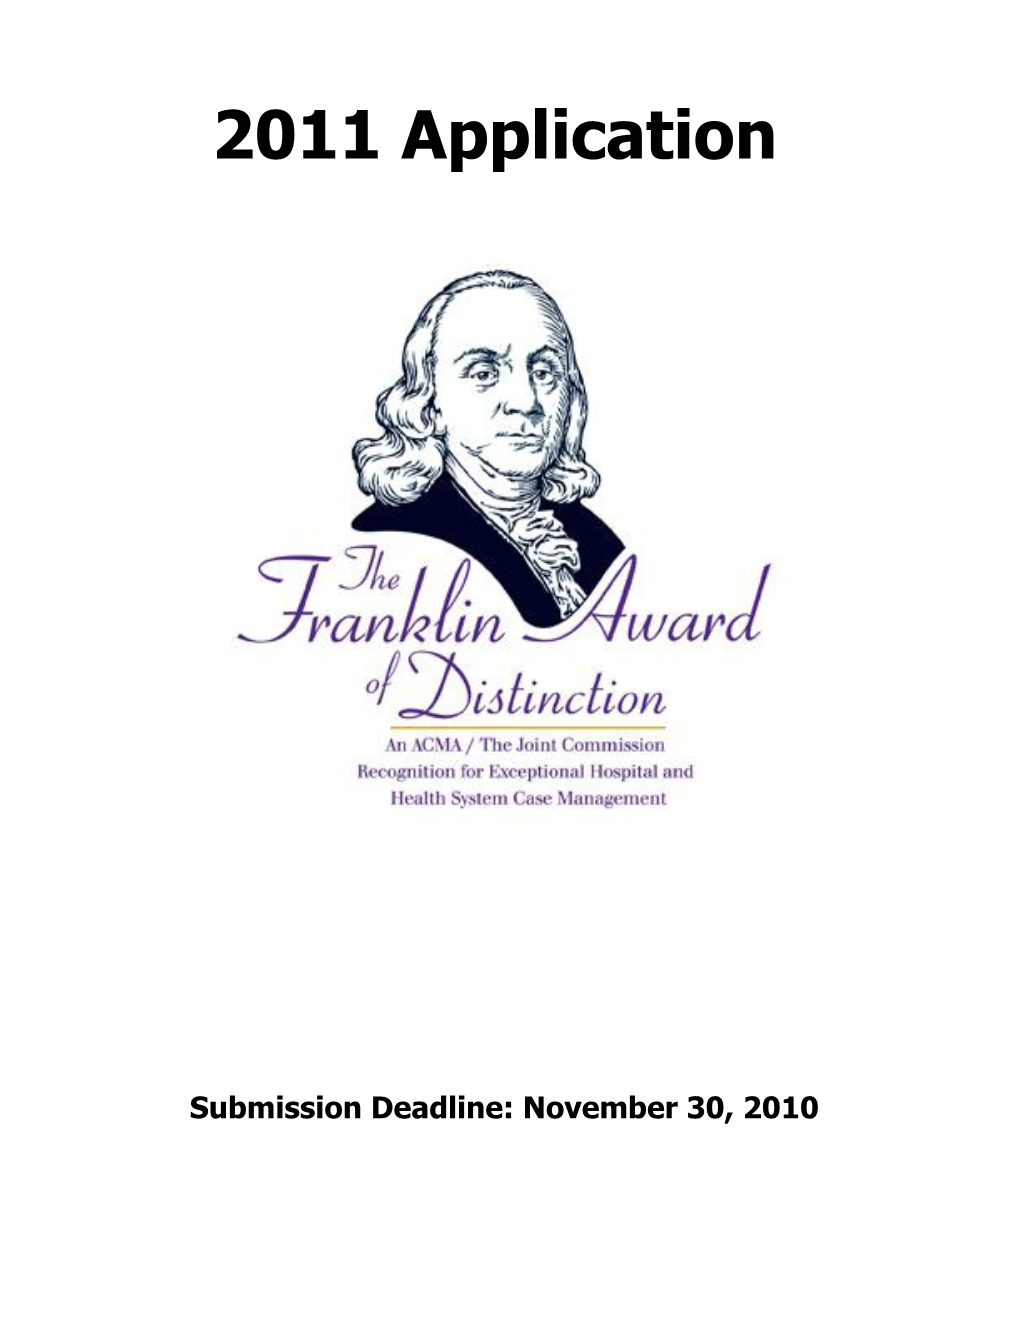 ACMA/The Joint Commission Franklin Award of Distinction Application (General Information P1)